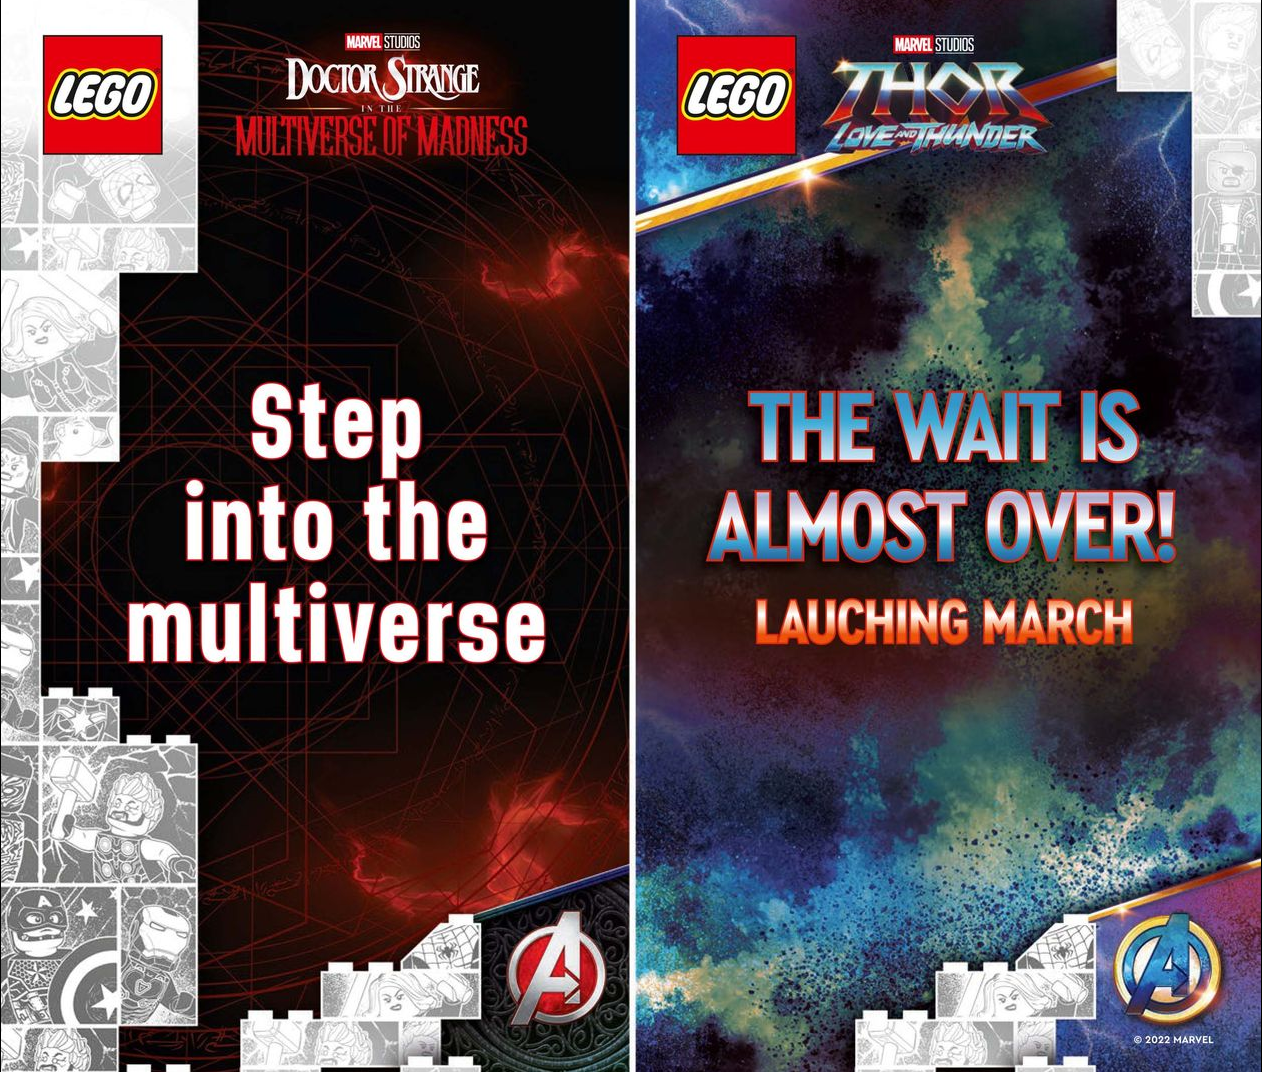 Lego March 2022 Calendar Lego Thor Love And Thunder Sets Coming March 2022! - Jay's Brick Blog